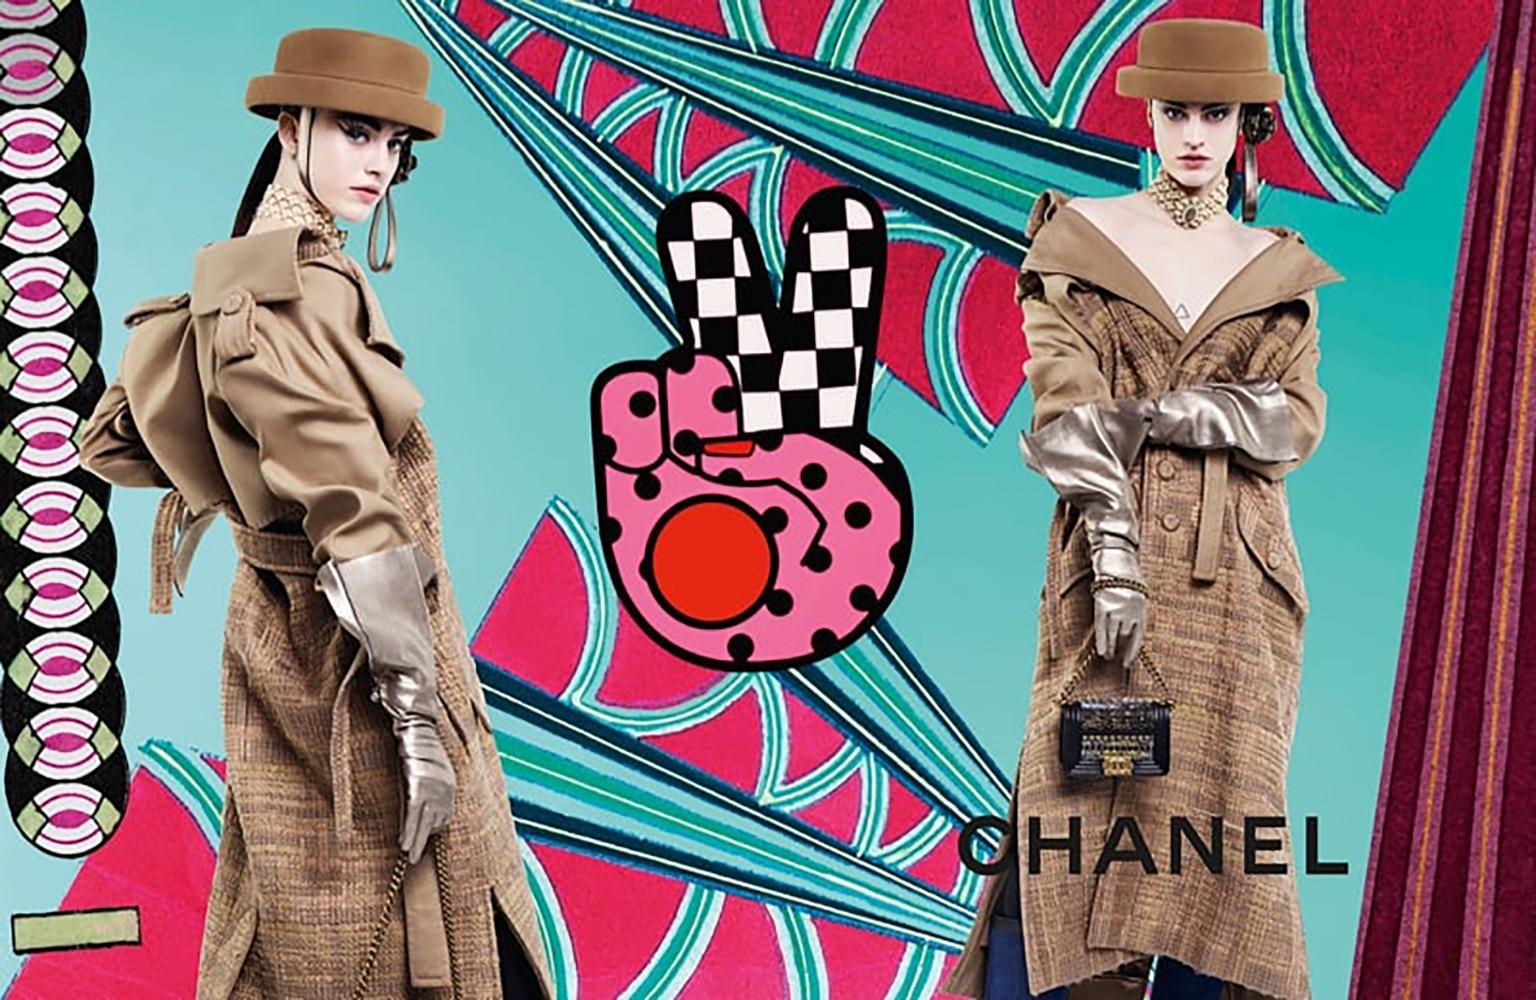 Chanel Iconic Billboards Ribbon Tweed Trench Coat In Excellent Condition For Sale In Dubai, AE